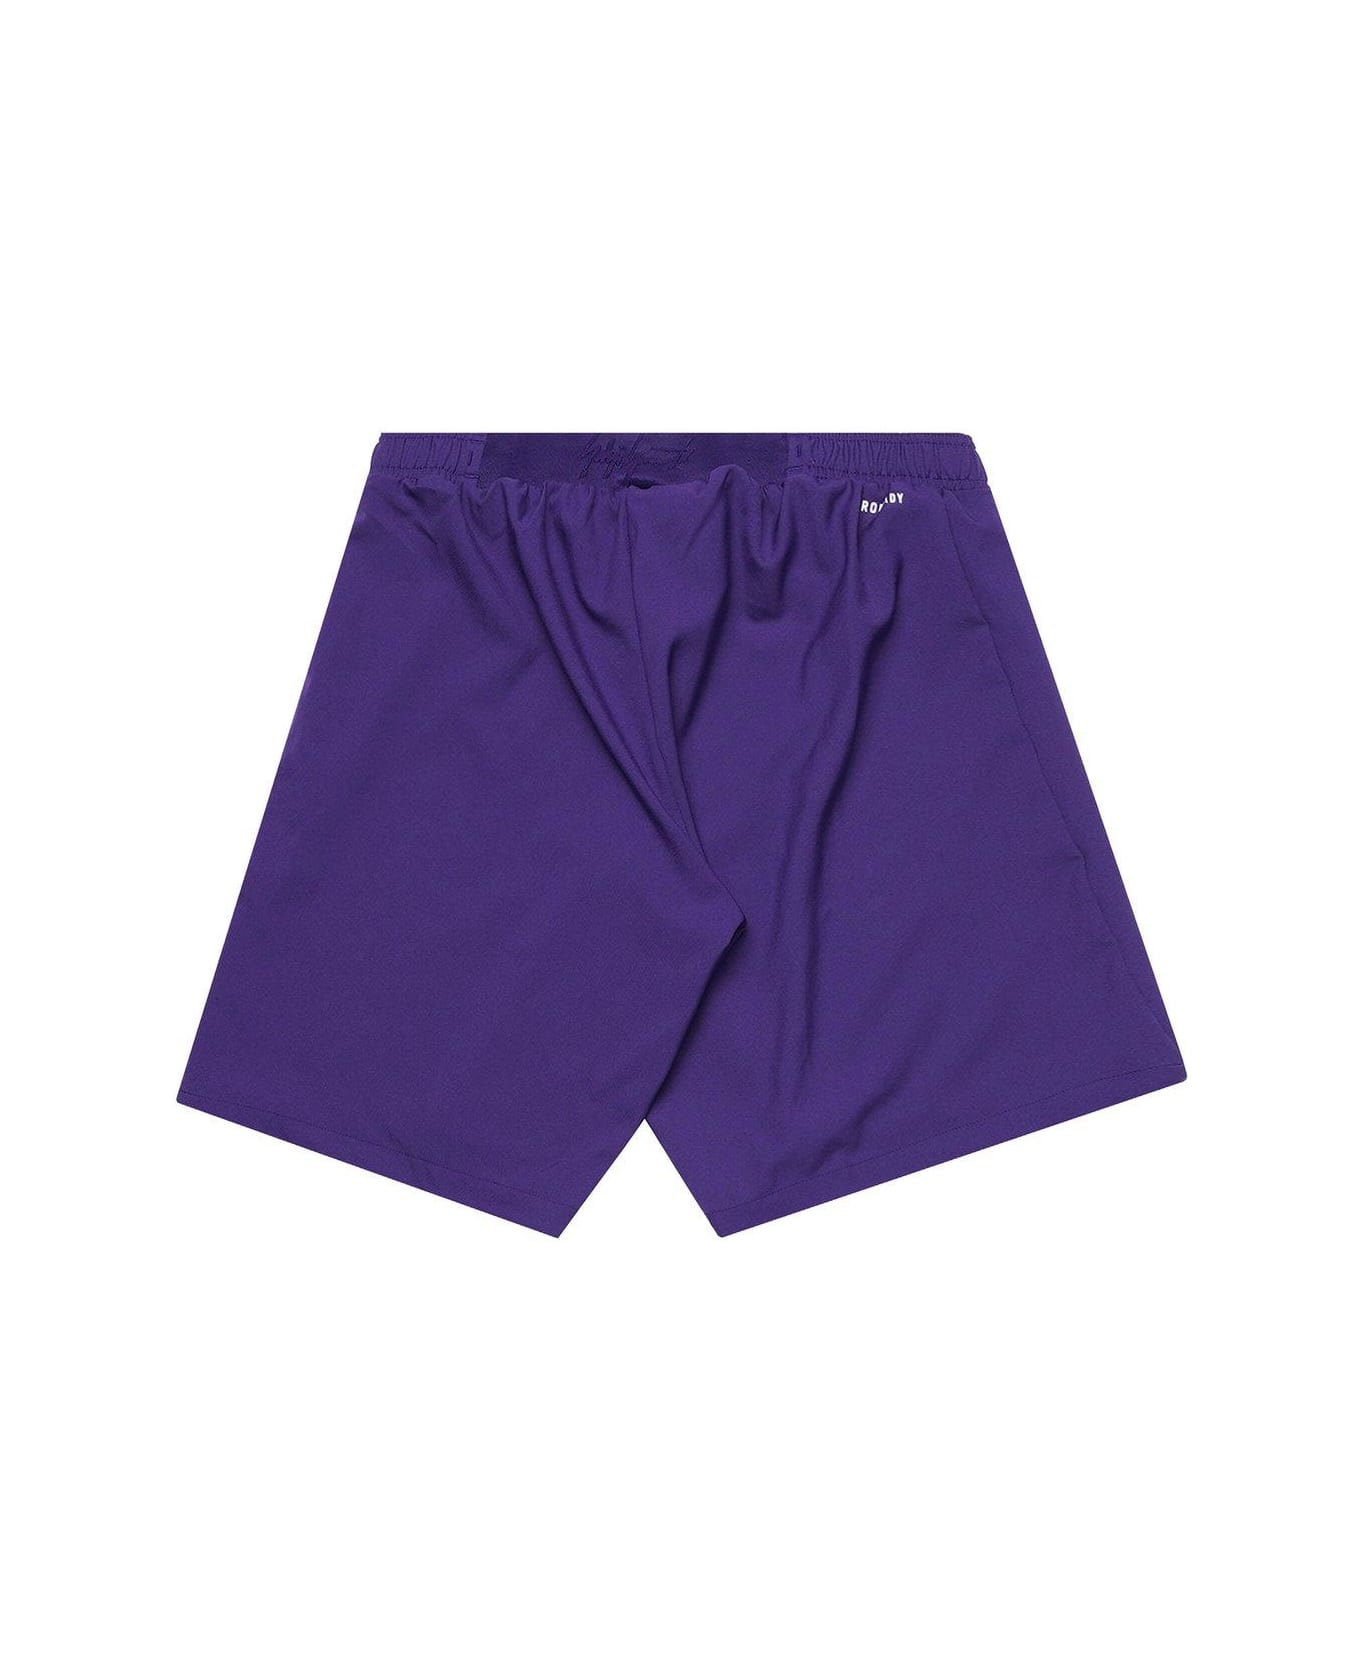 Y-3 Real Madrid 23/24 Fourth Authentic Shorts Shorts - VIOLET